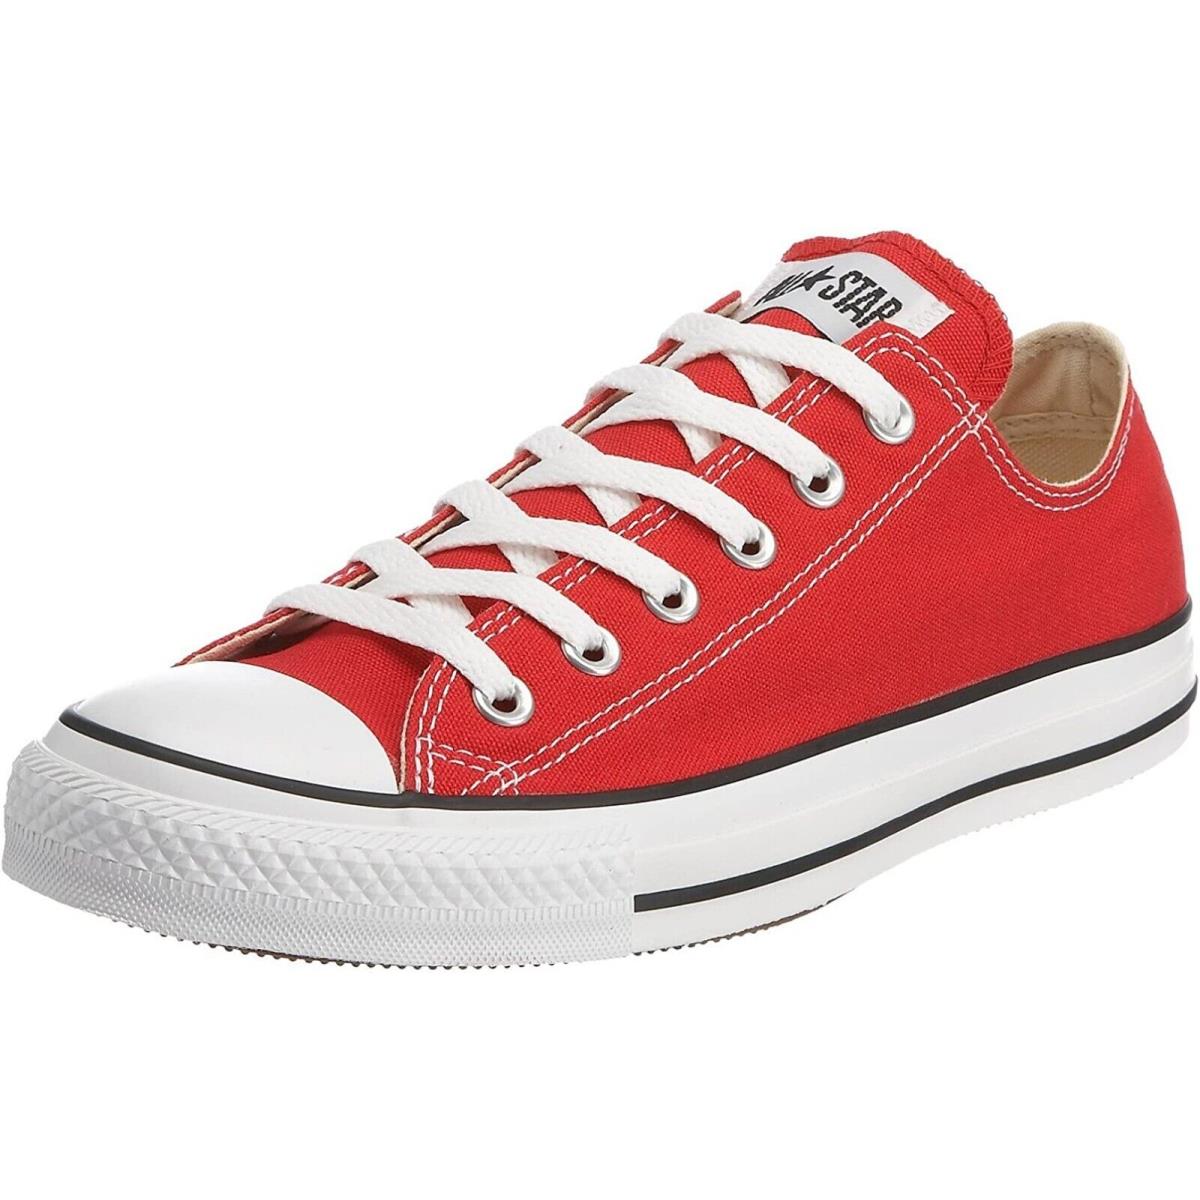 Converse Chuck Taylor All Star Classic Low Top Canvas Red White Men Size 8 Shoe